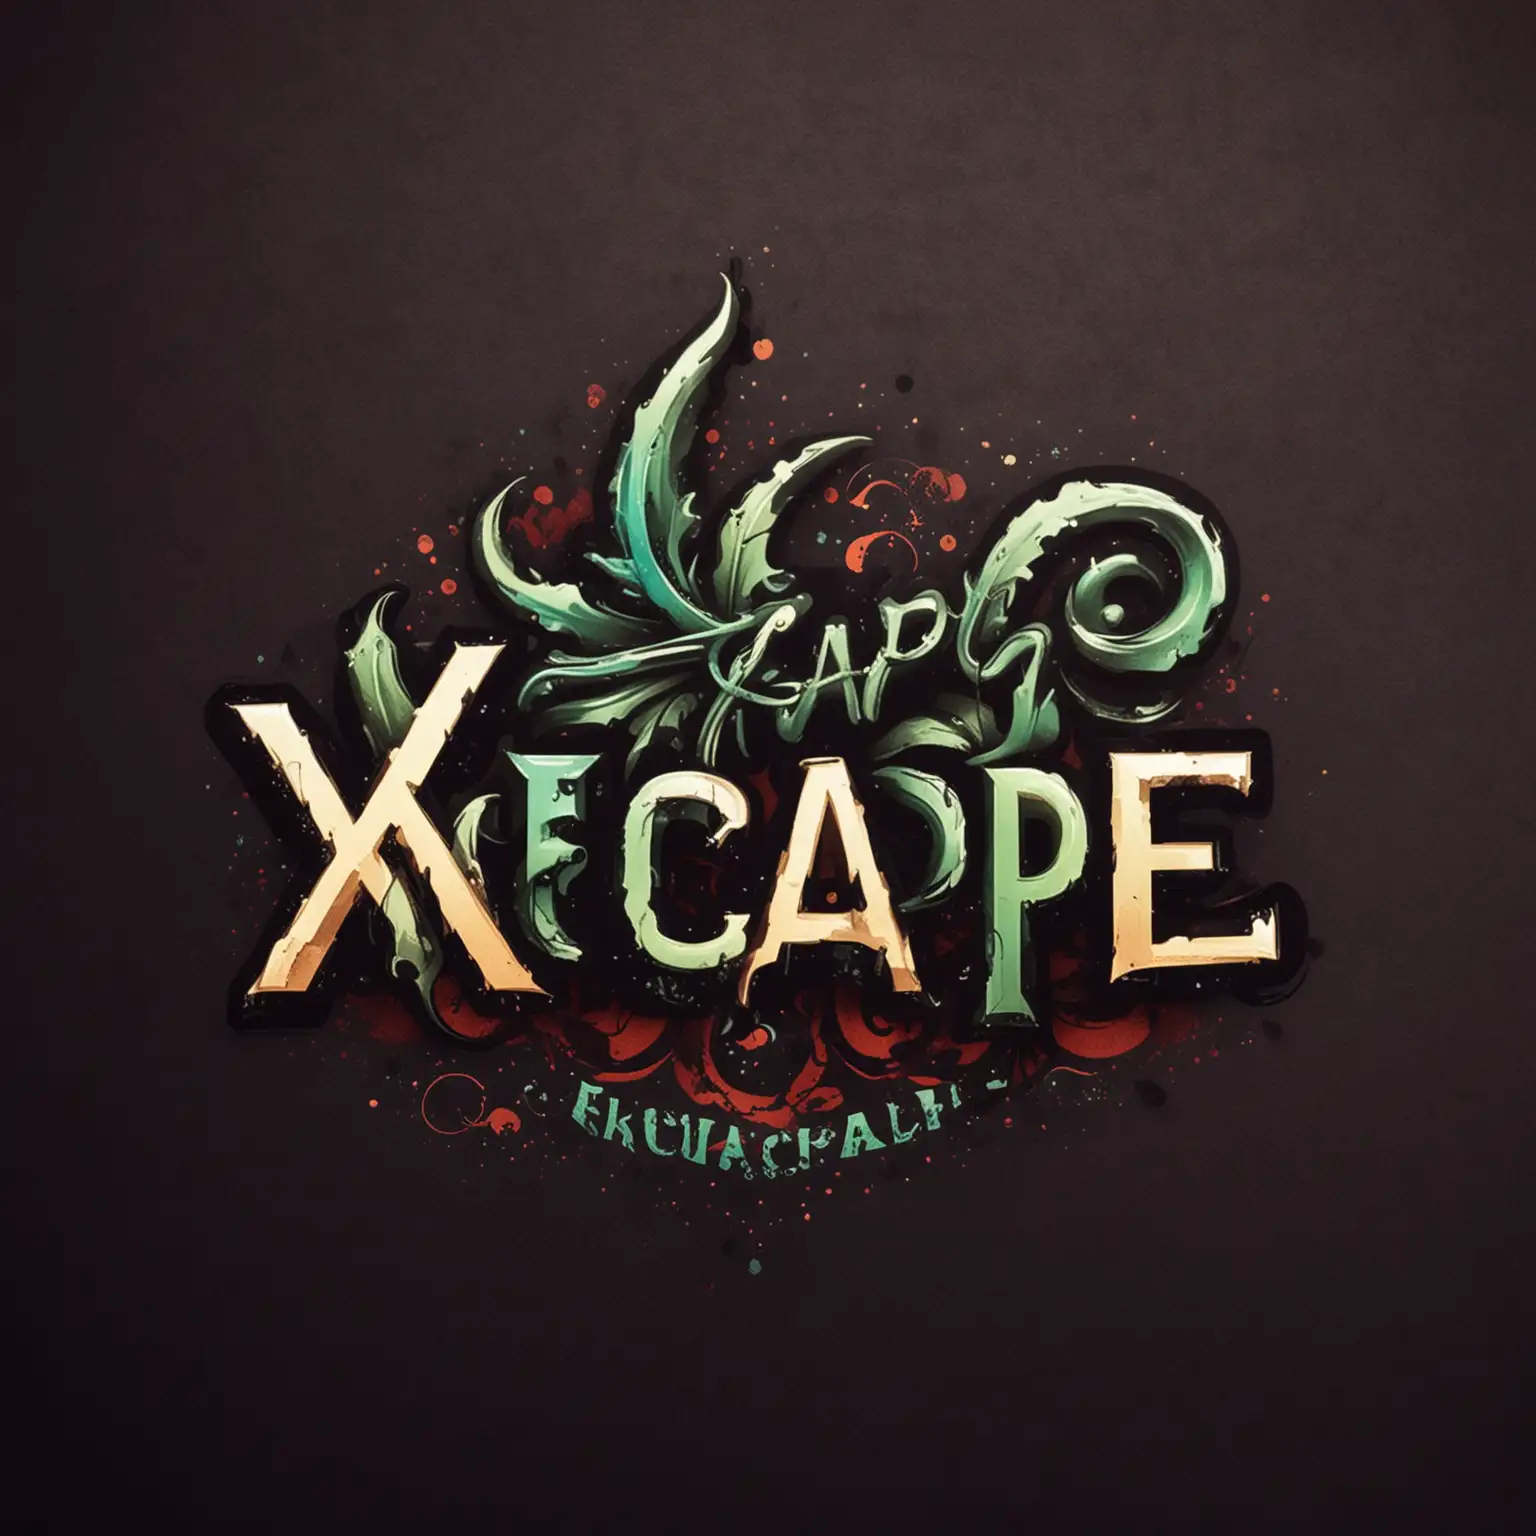 A logo with this word "Xscape" for a hookah bar 